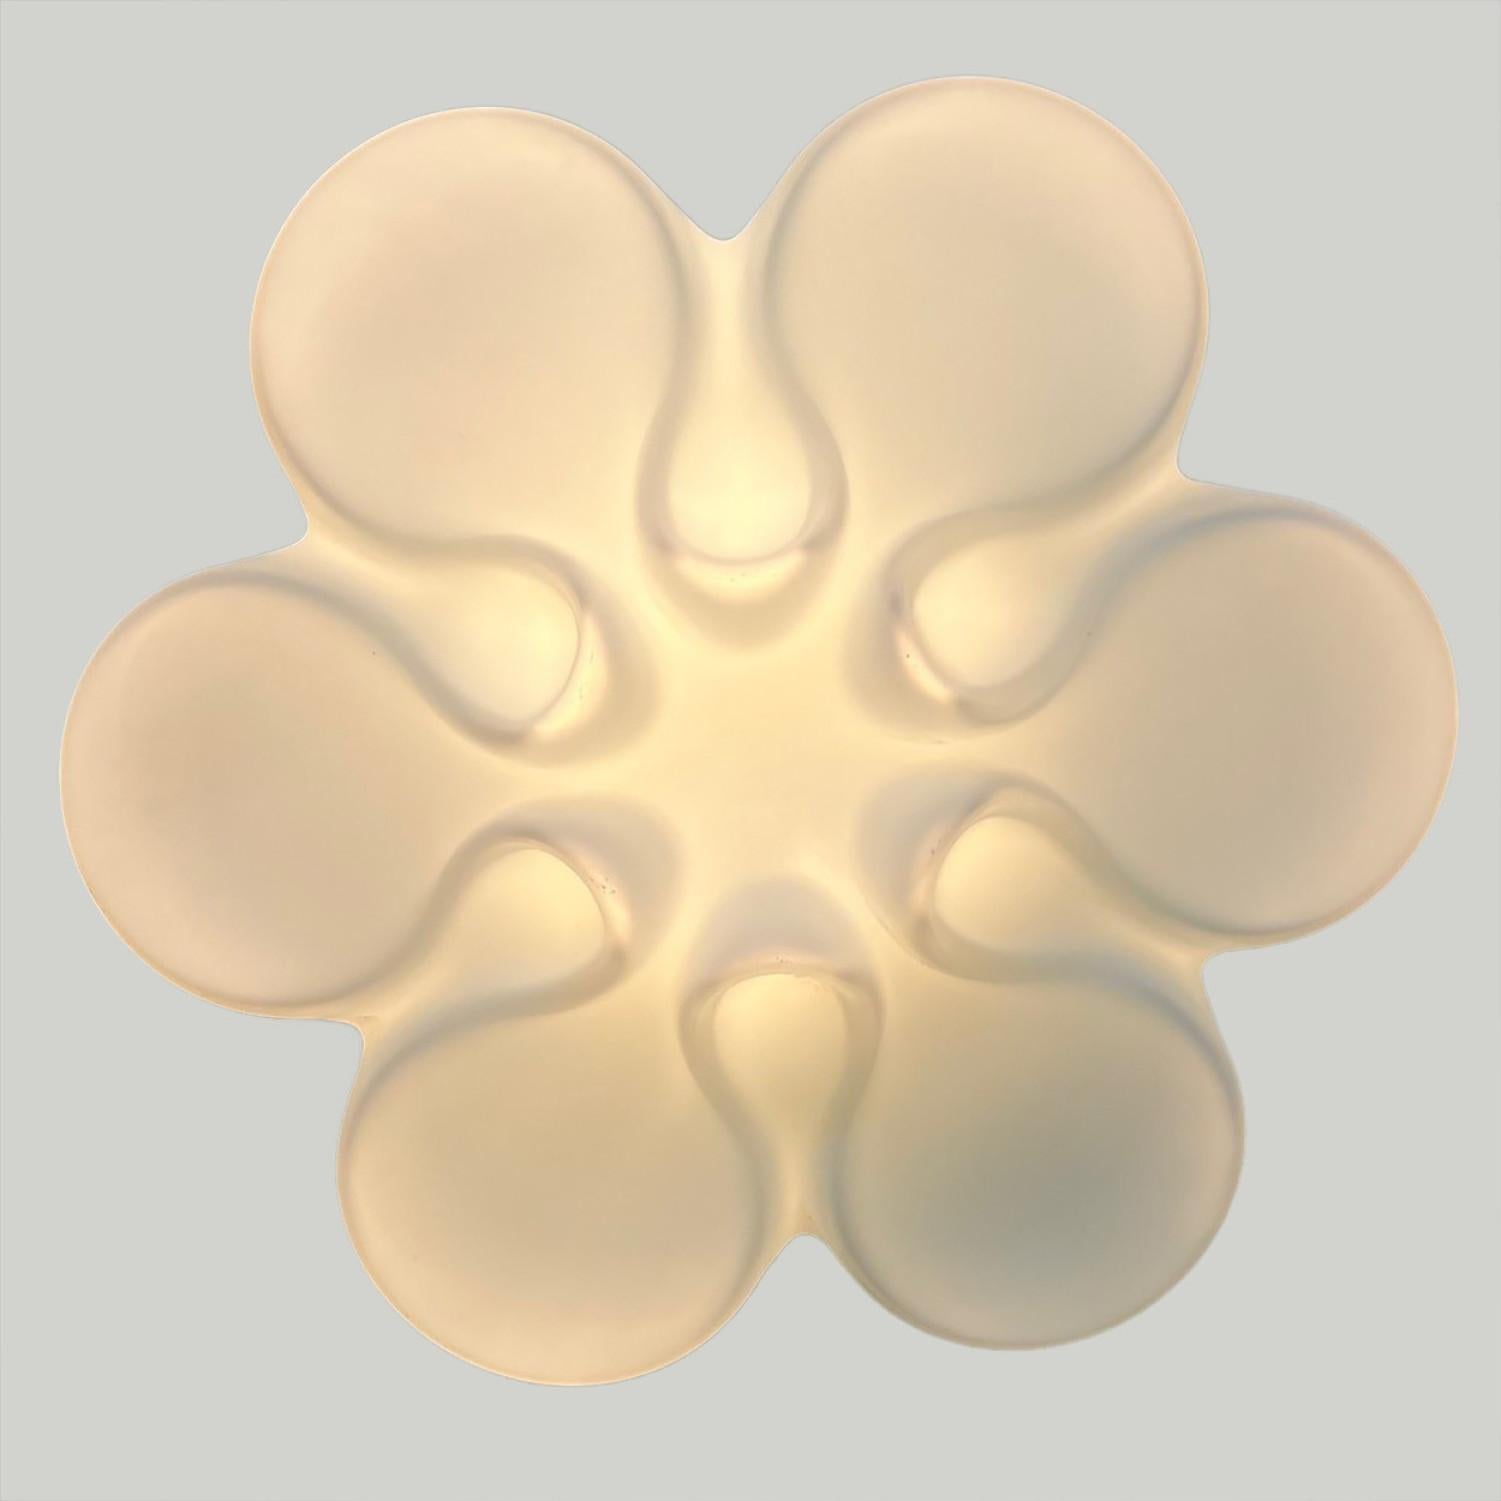 Beautiful wall lights with the shape of a small daisy, made with white glass. Manufactured around 1920, Belga, Belgium.
We have a total of 3 lights.

Dimensions:
Diameter: 10.24